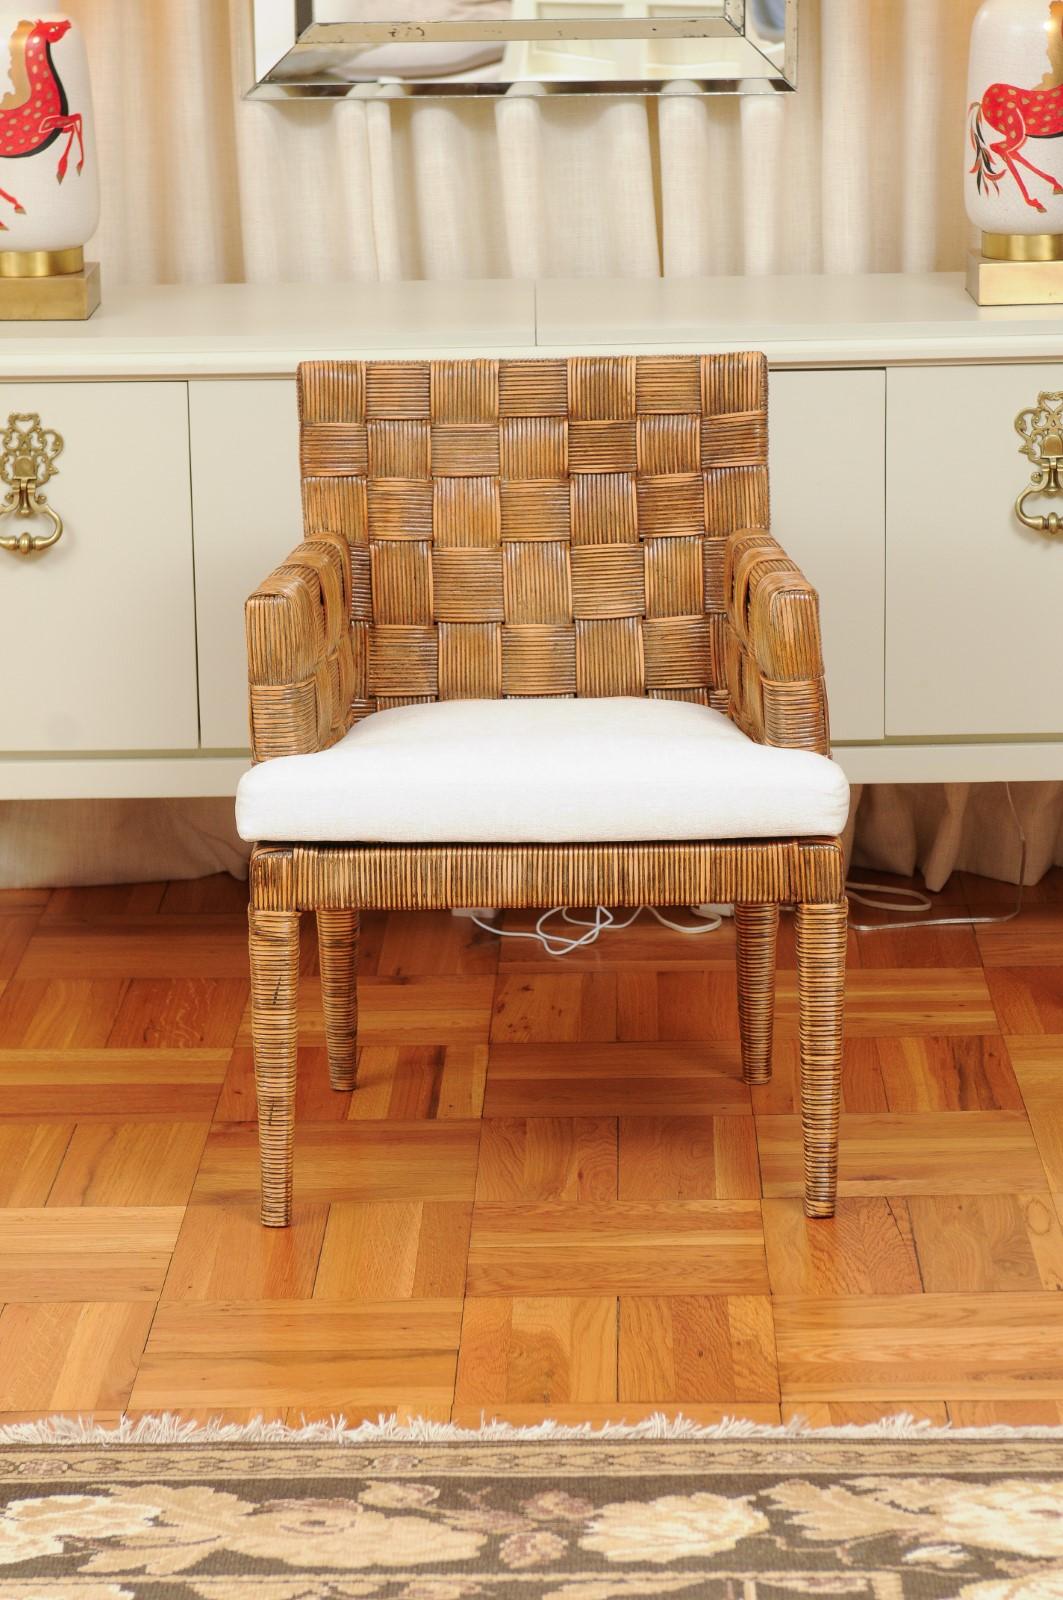 This magnificent unique set of dining chairs is shipped as professionally photographed and described in the listing narrative: Meticulously professionally restored, newly upholstered and completely installation ready. Expert custom upholstery